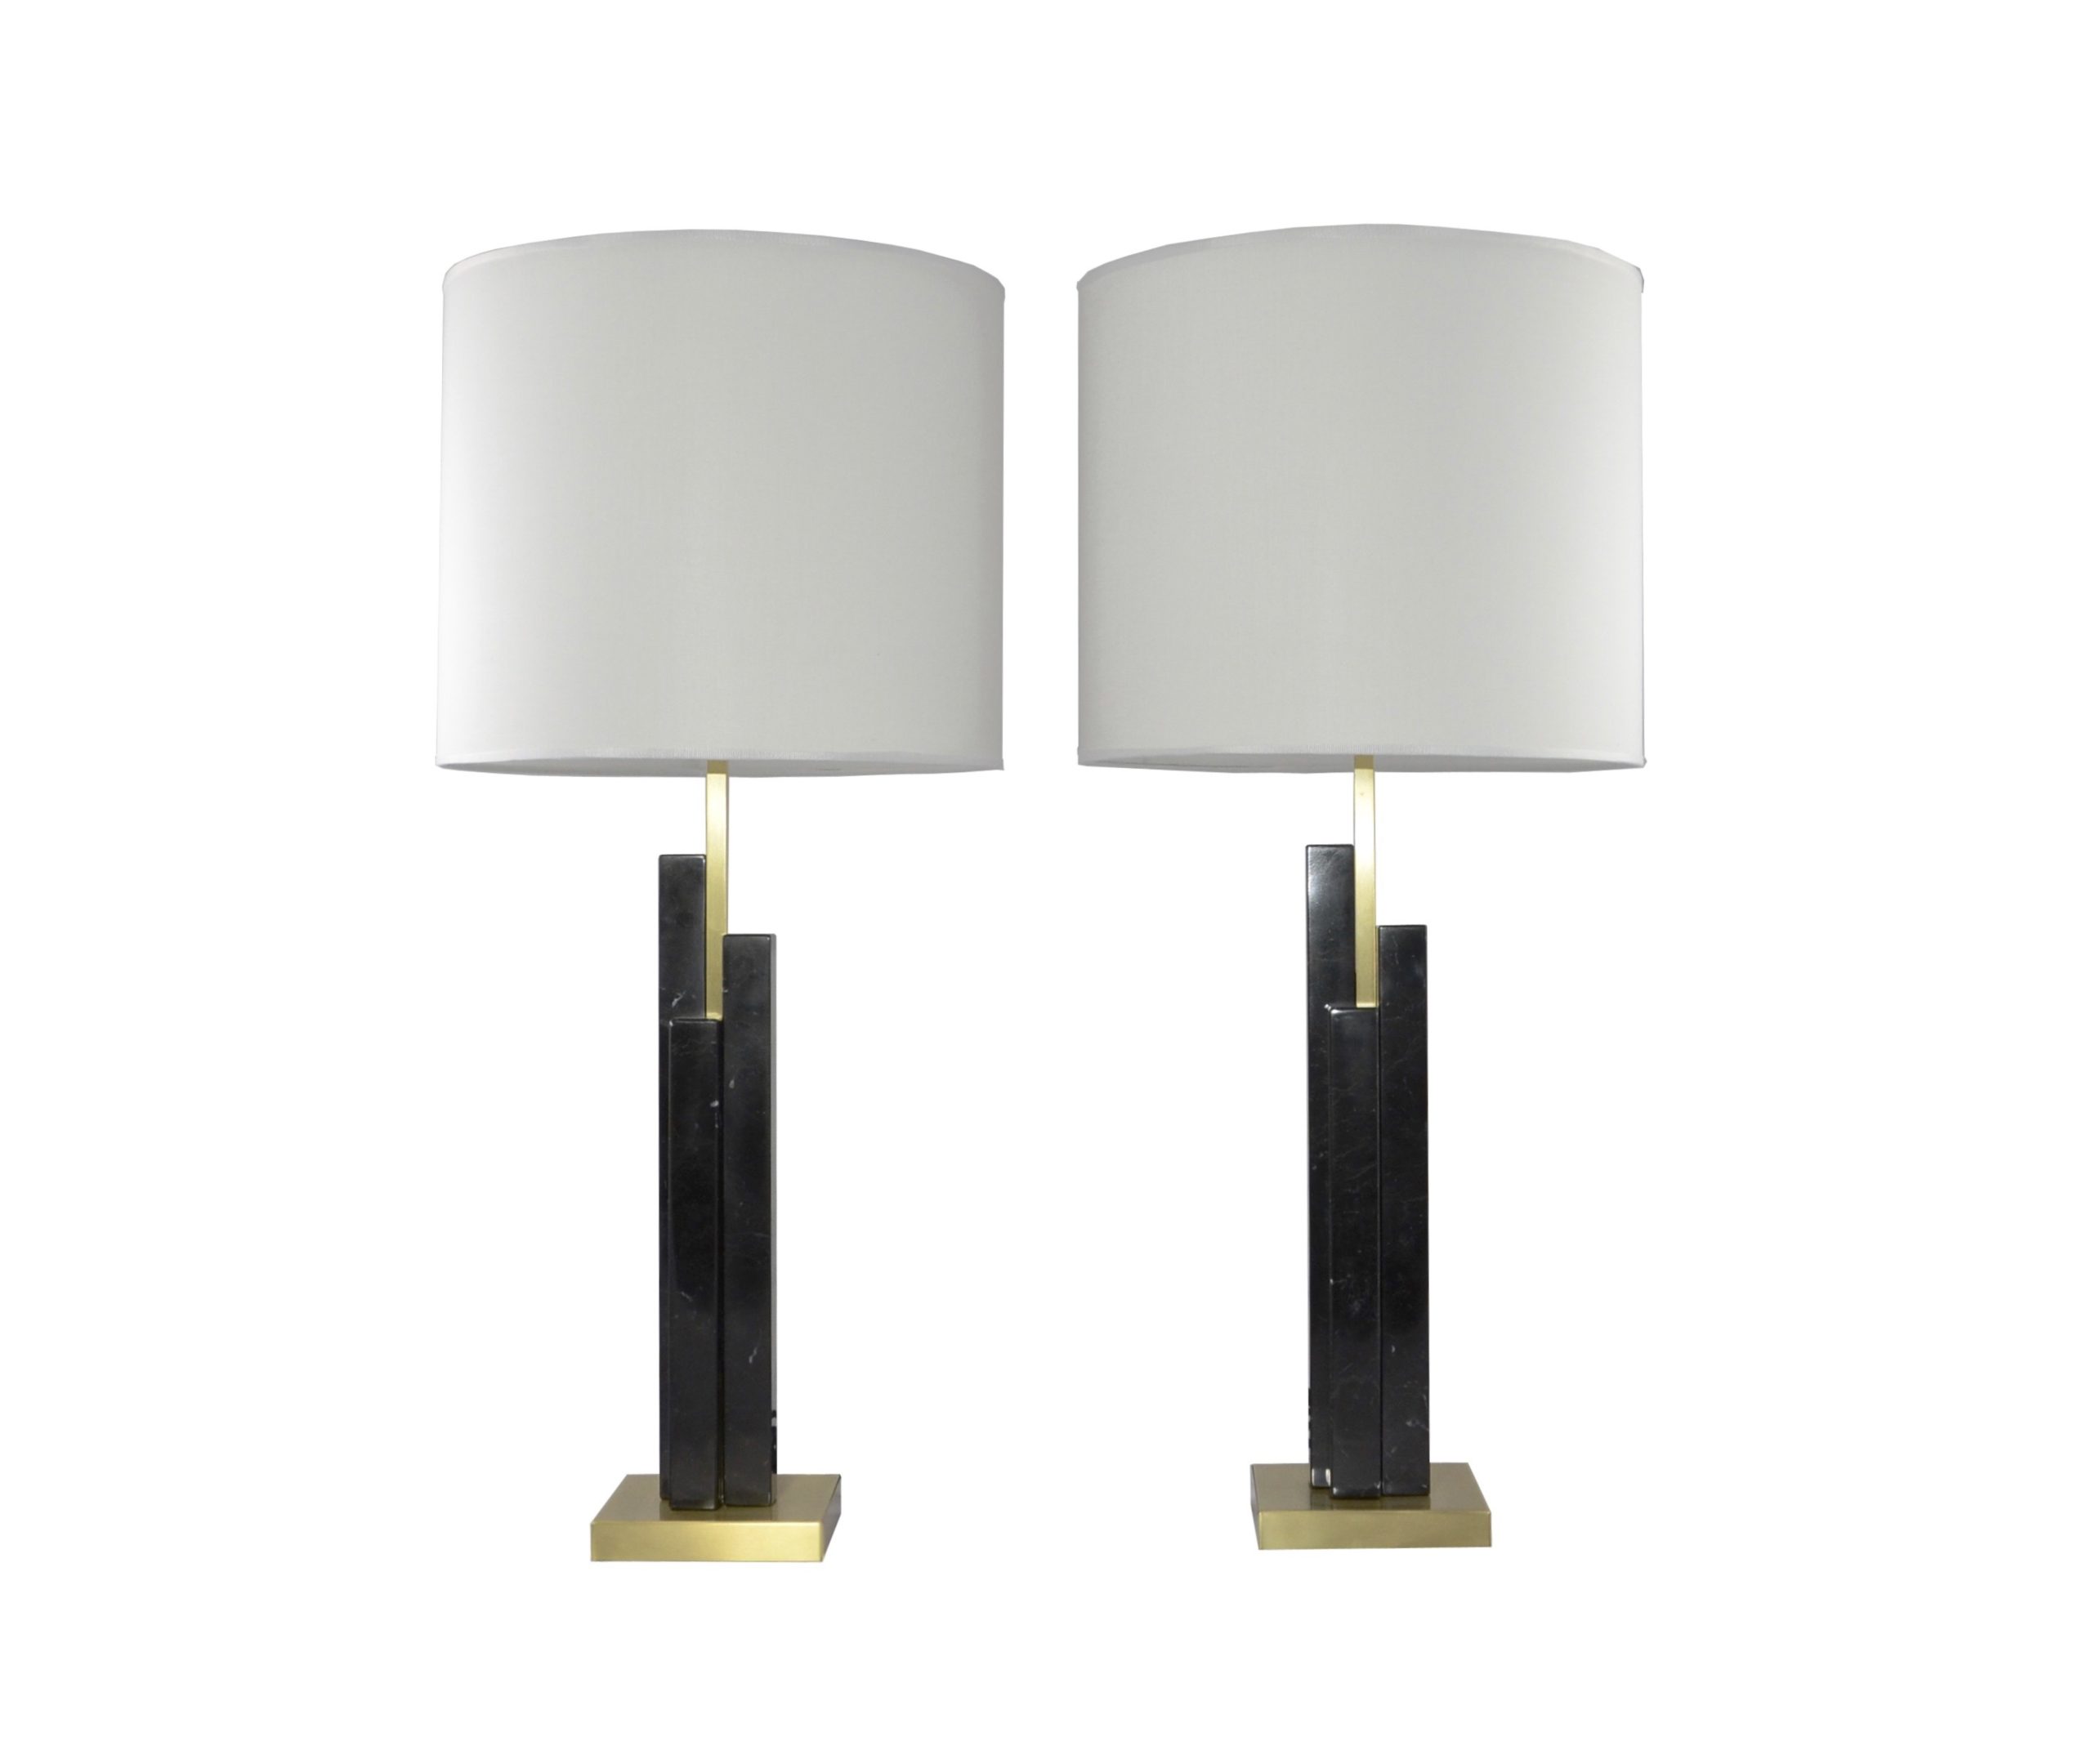 cosulich_interiors_and_antiques_products_new_york_design_bespoke_art_deco_design_skyline_pair_black_marble_satin_brass_table_lamp-scaled-1